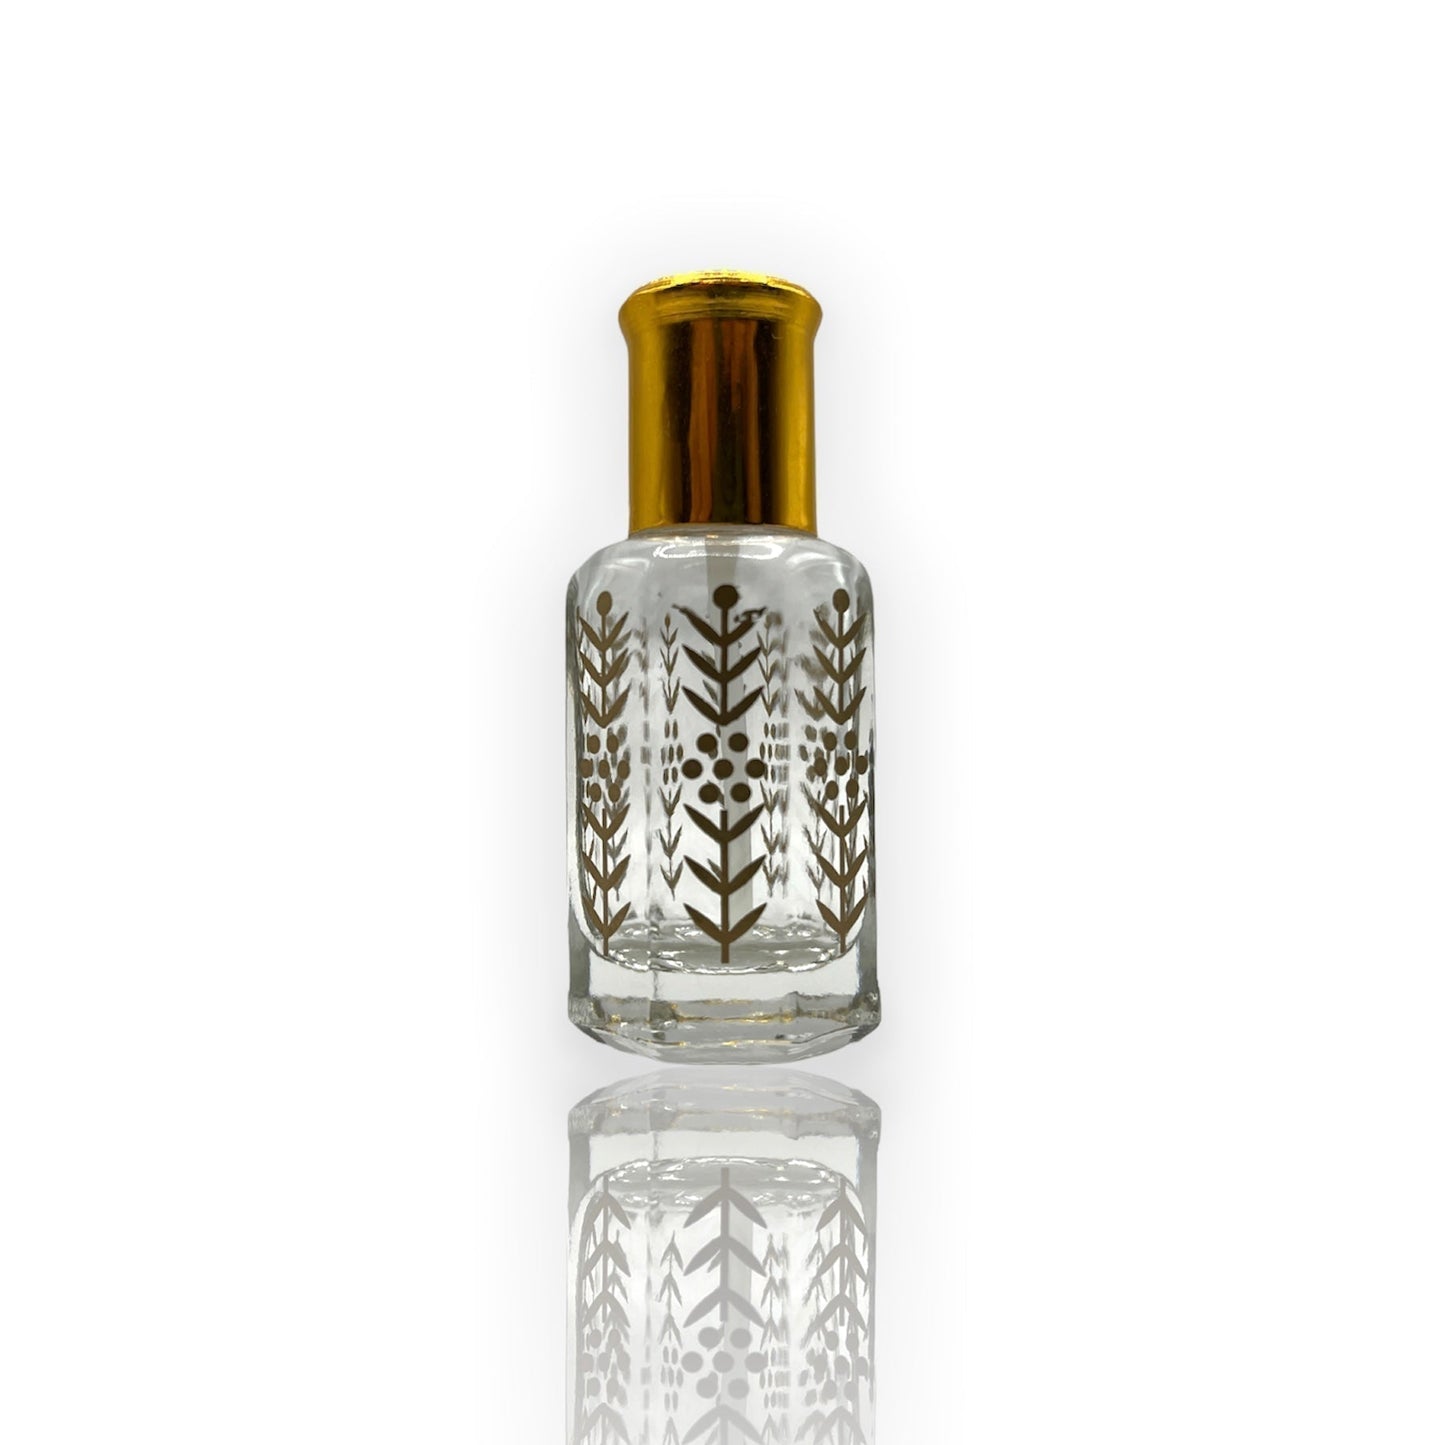 M-16 Oil Perfume *Inspired By VIP 212